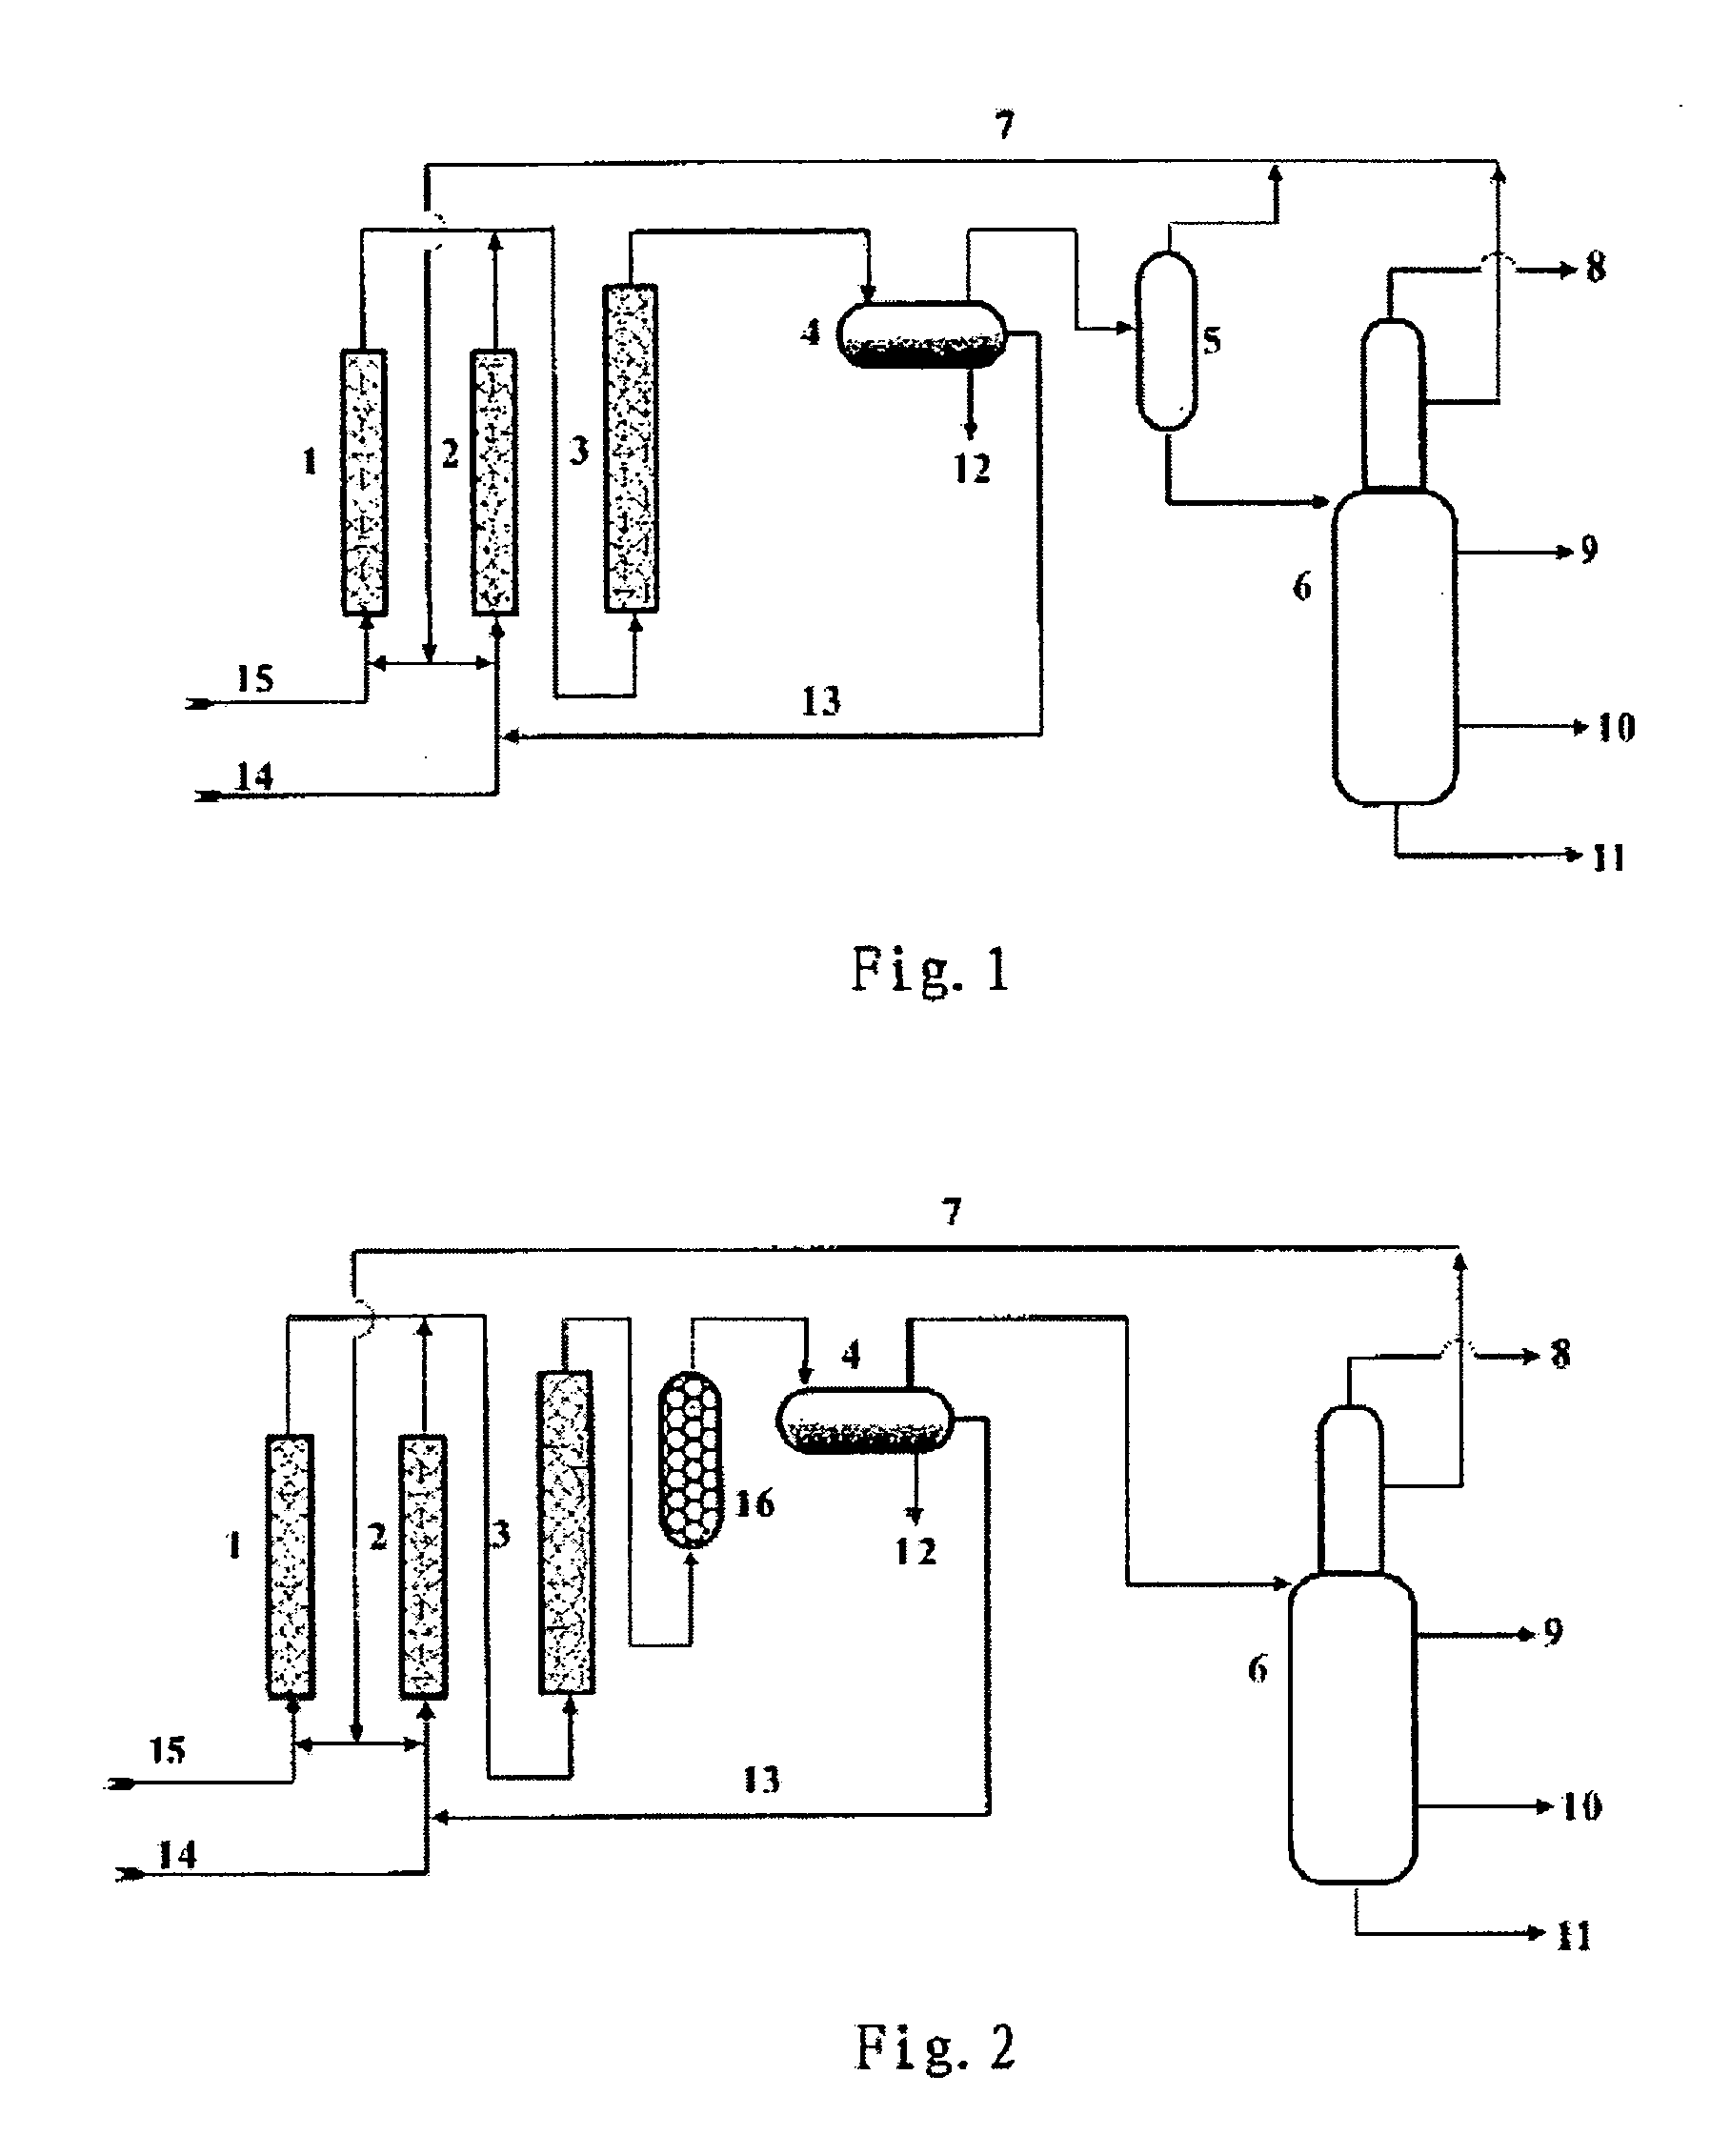 Method for manufacturing alkylate oil with composite ionic liquid used as catalyst